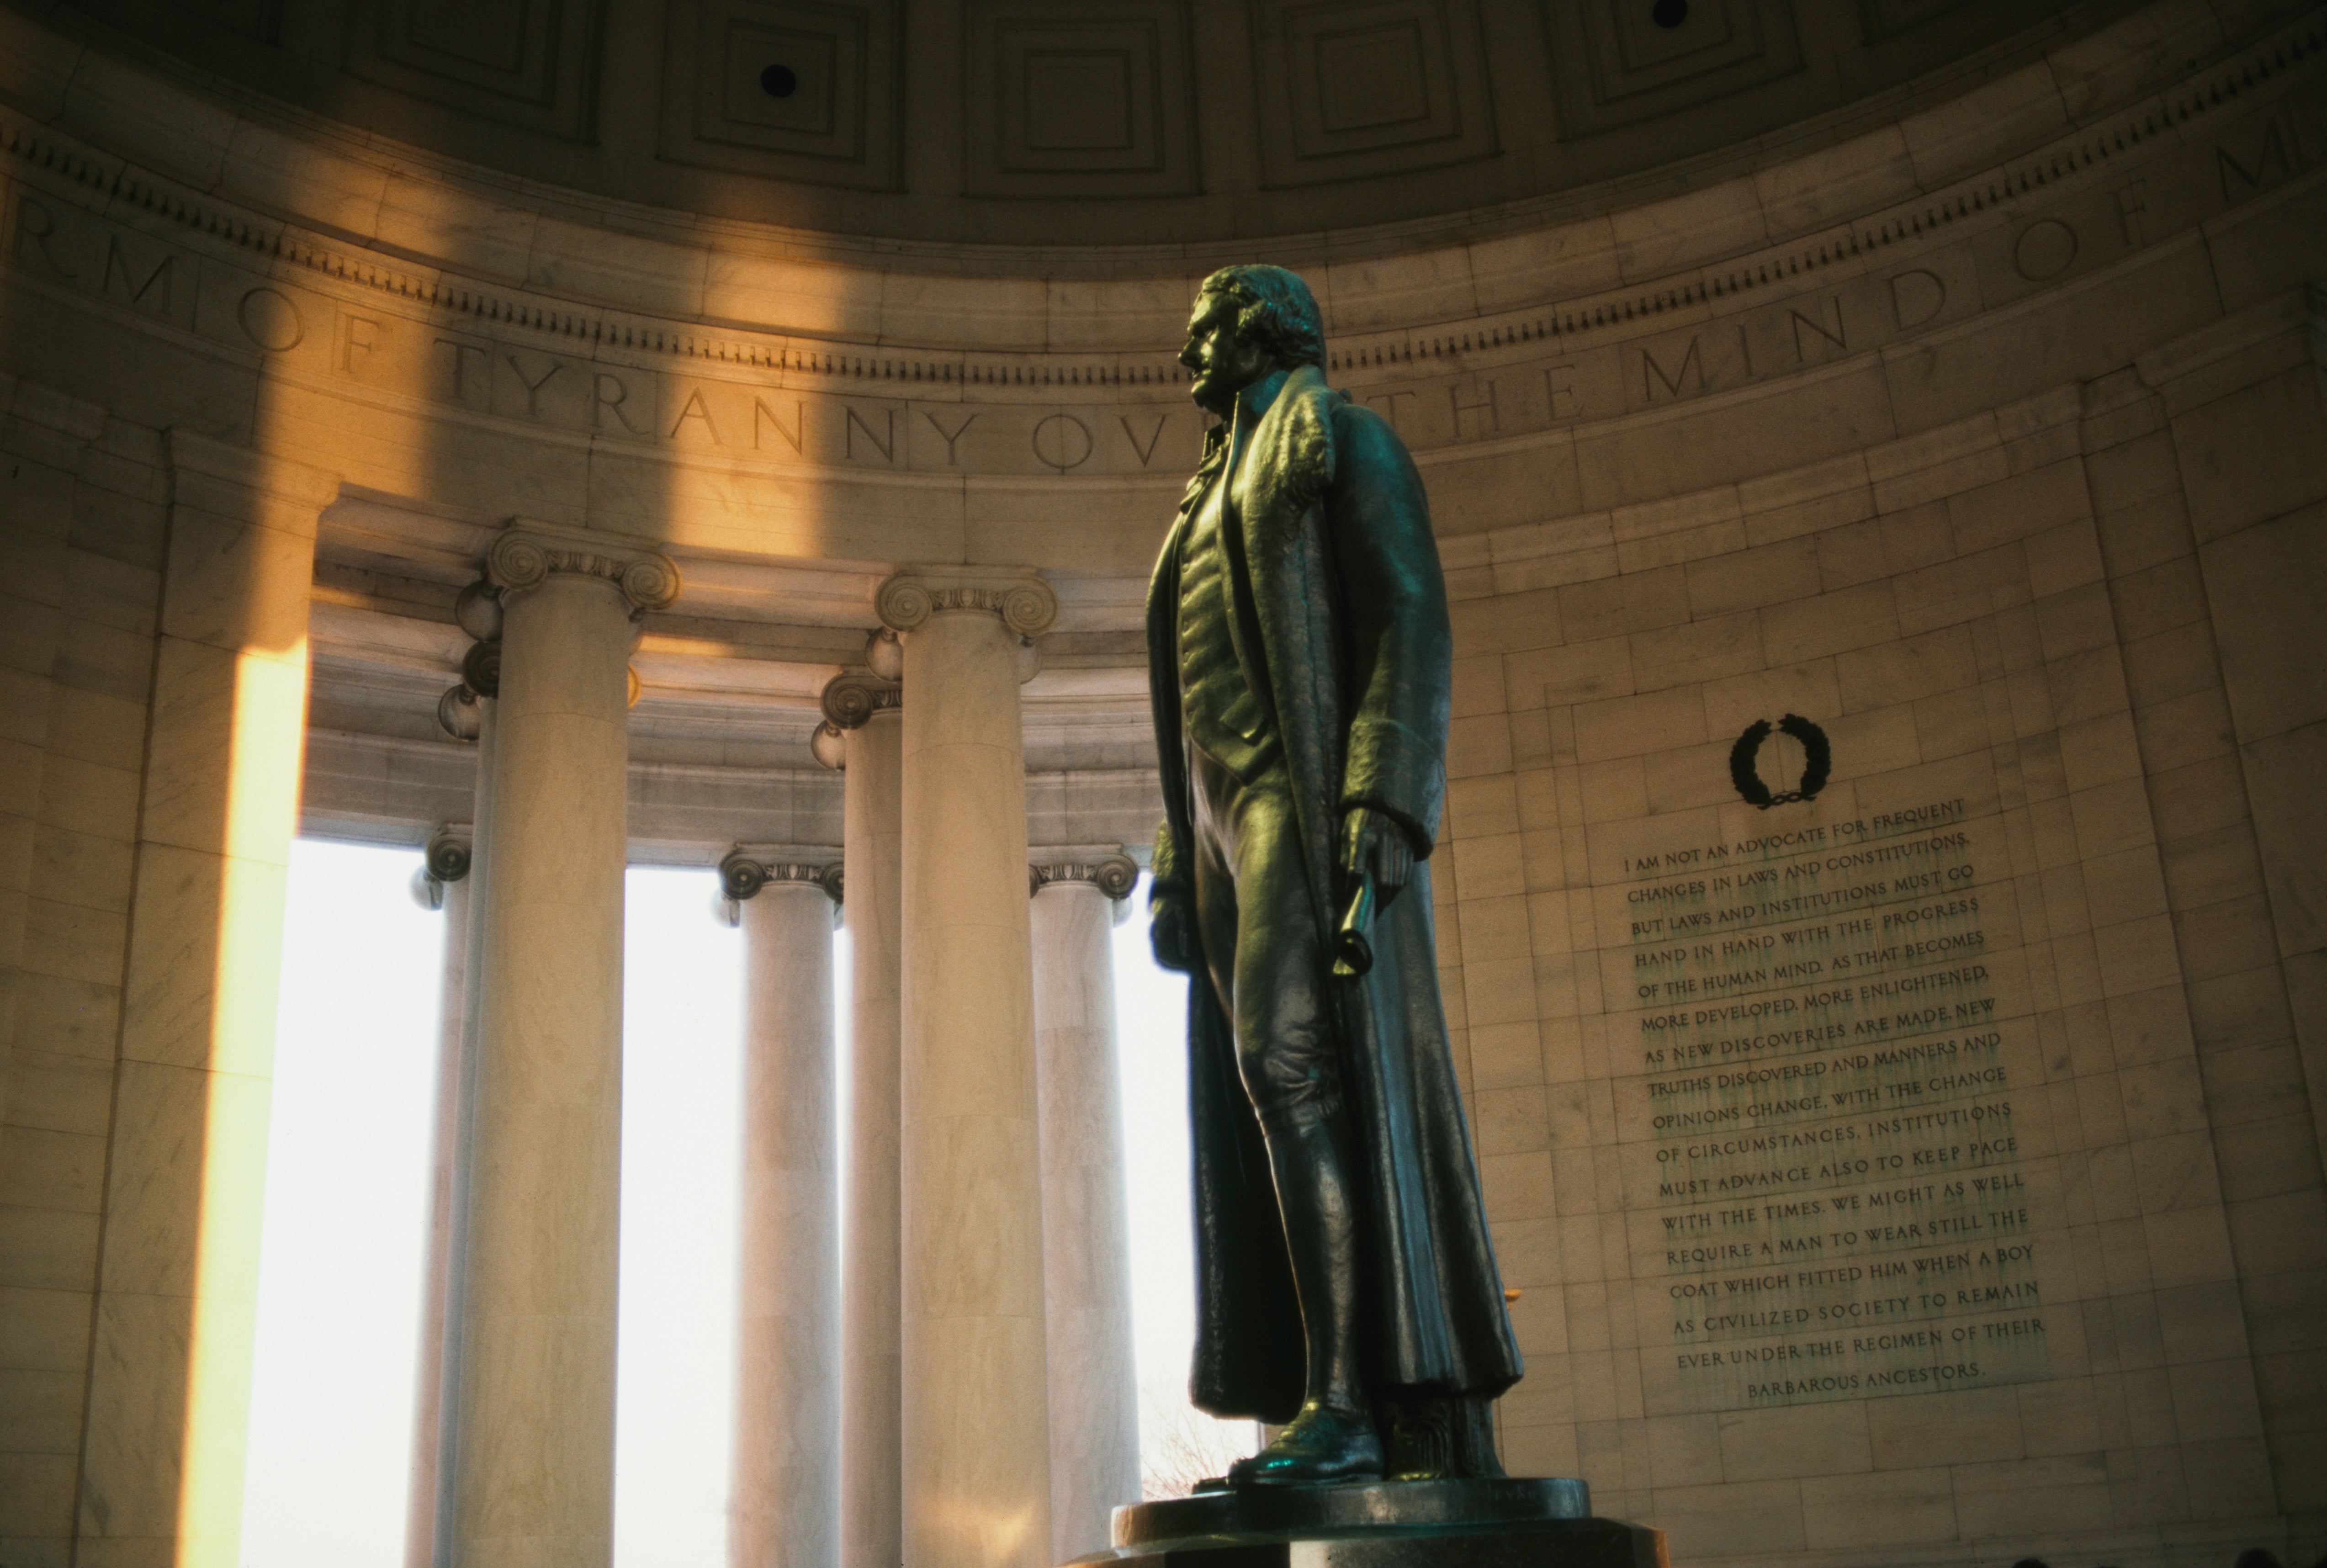 Rudulph Evans's statue of Thomas Jefferson with excerpts of the  Declaration of Independence seen behind, Thomas Jefferson Memorial,  Washington, D.C., USA, March 1985.  (Photo: Barbara Alper, Getty Images)